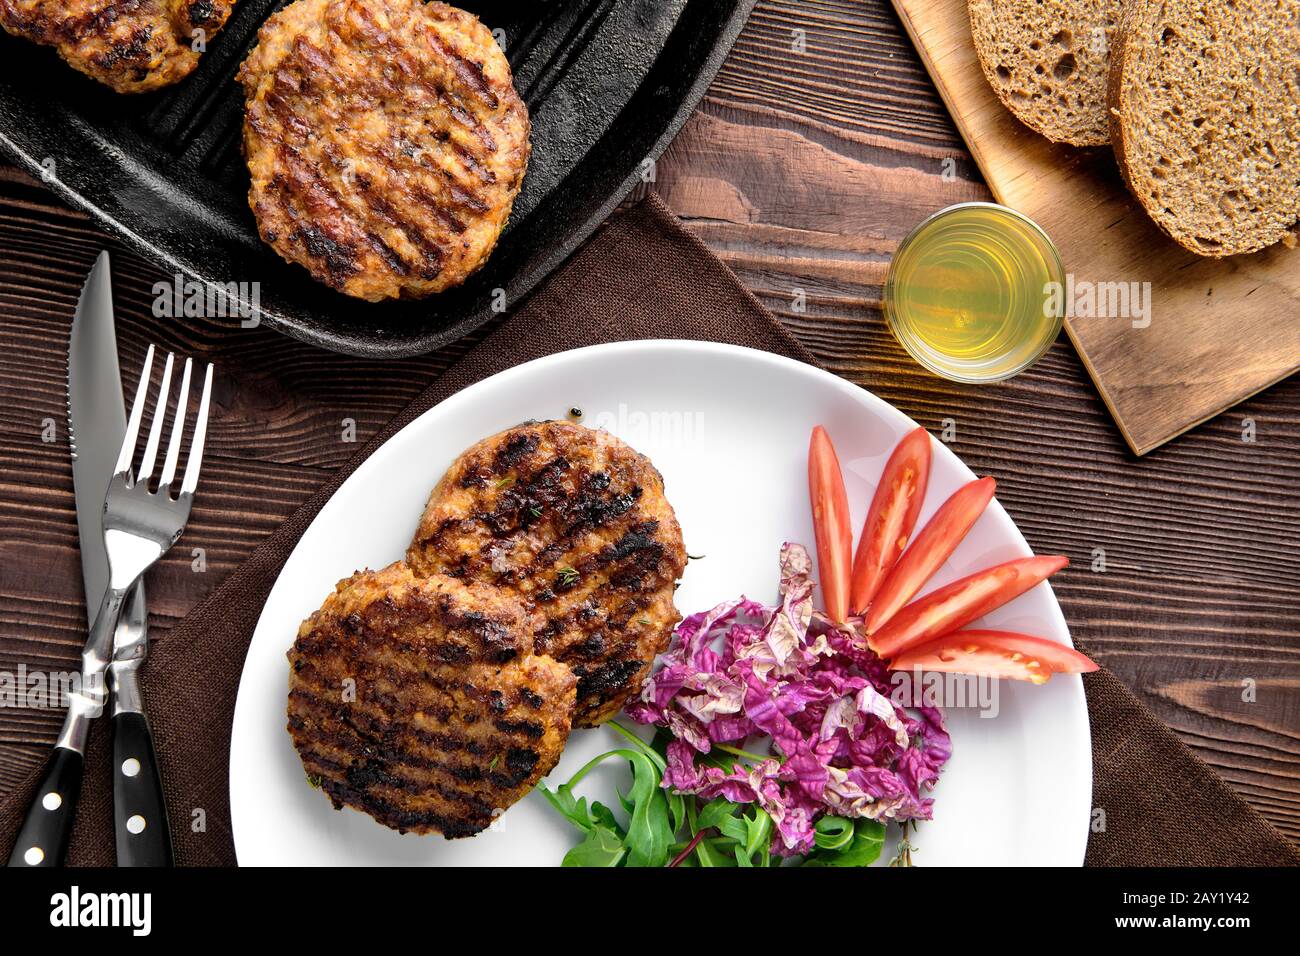 Top view of country dinner with cutlet and fresh salad, brown bread and moonshine on rustic wooden table Stock Photo